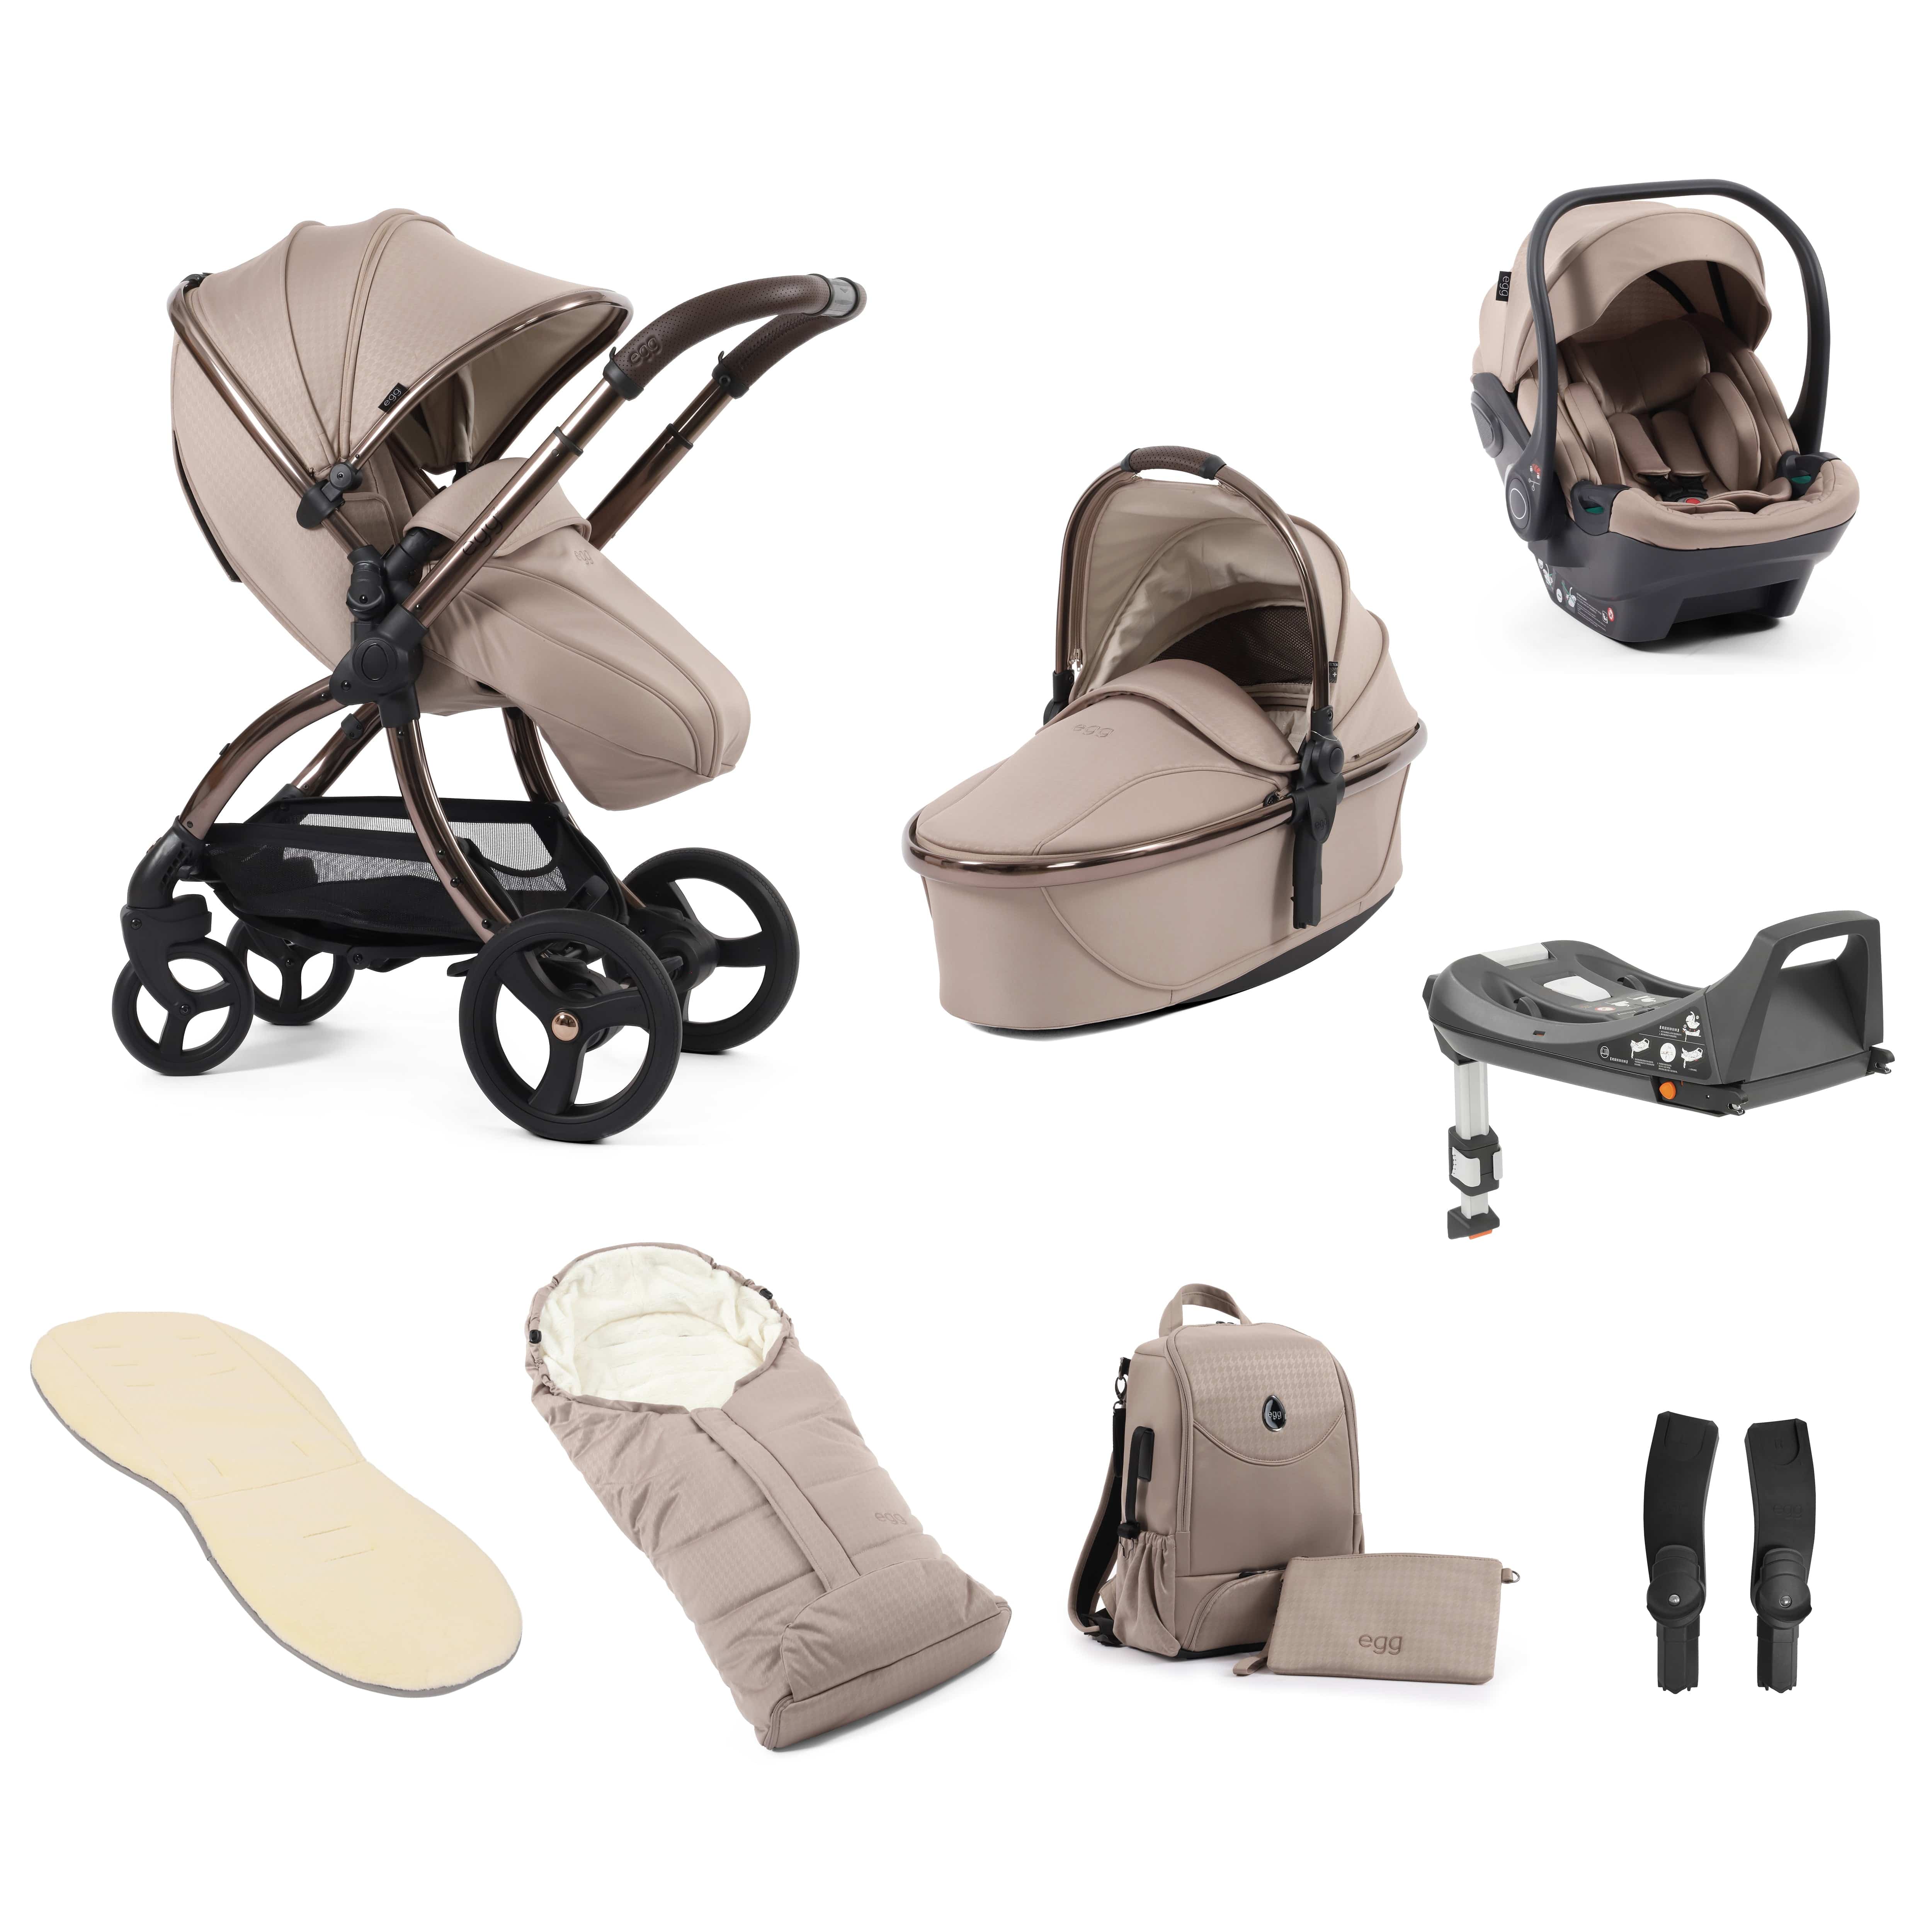 egg3 Luxury Travel System Bundle Special Edition Houndstooth Almond Baby Prams 14726-HTA 5060711567860